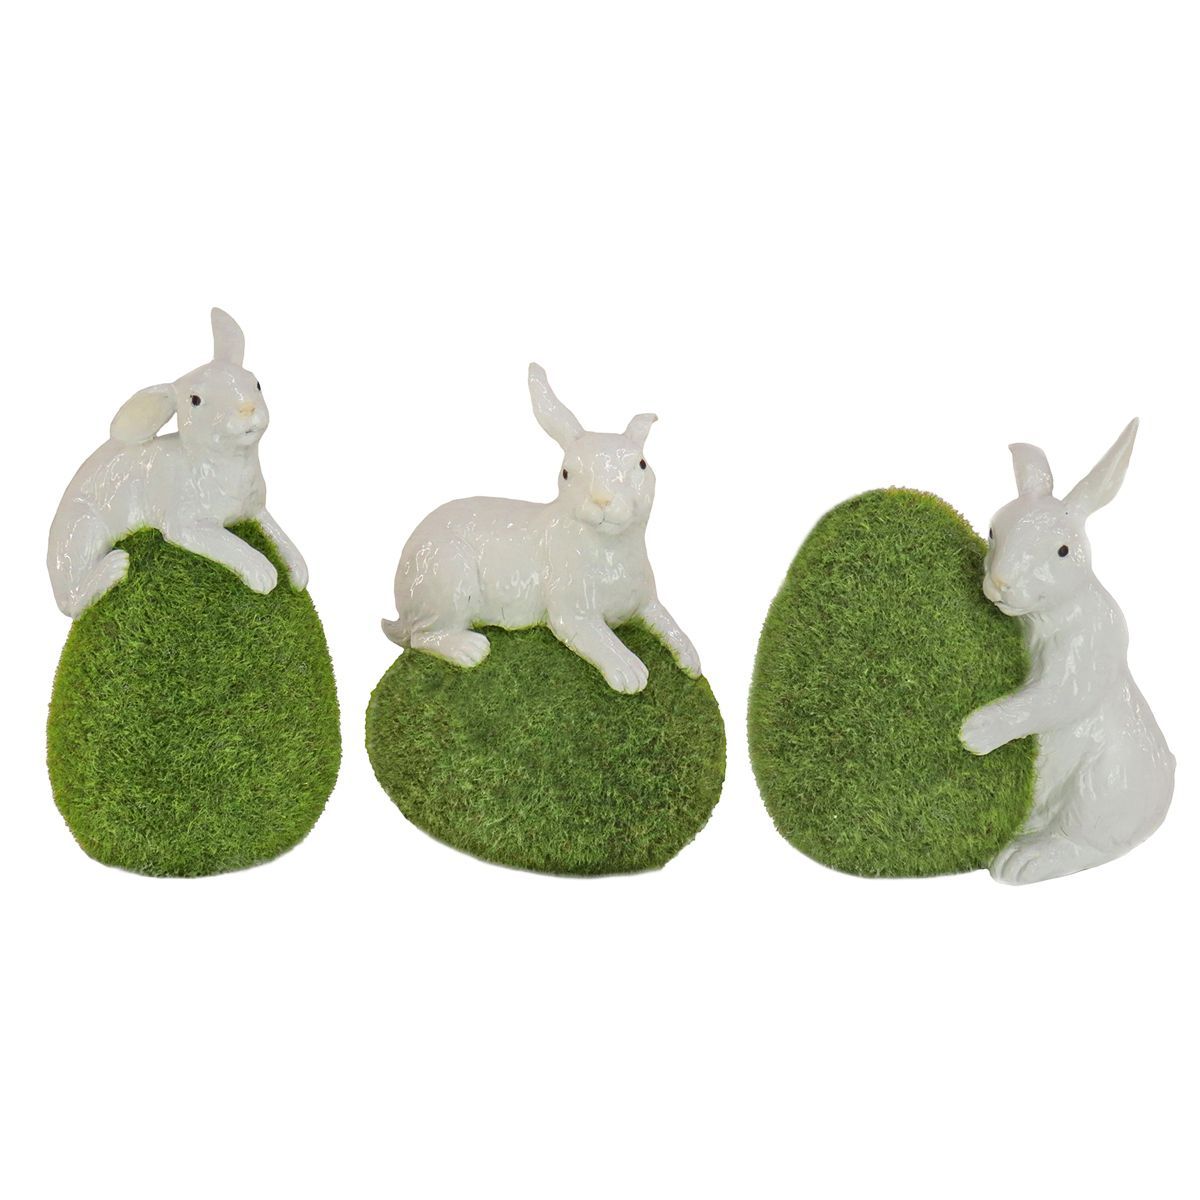 7" Artificial Green Moss Eggs with White Bunnies (Set of 3) - National Tree Company | Target